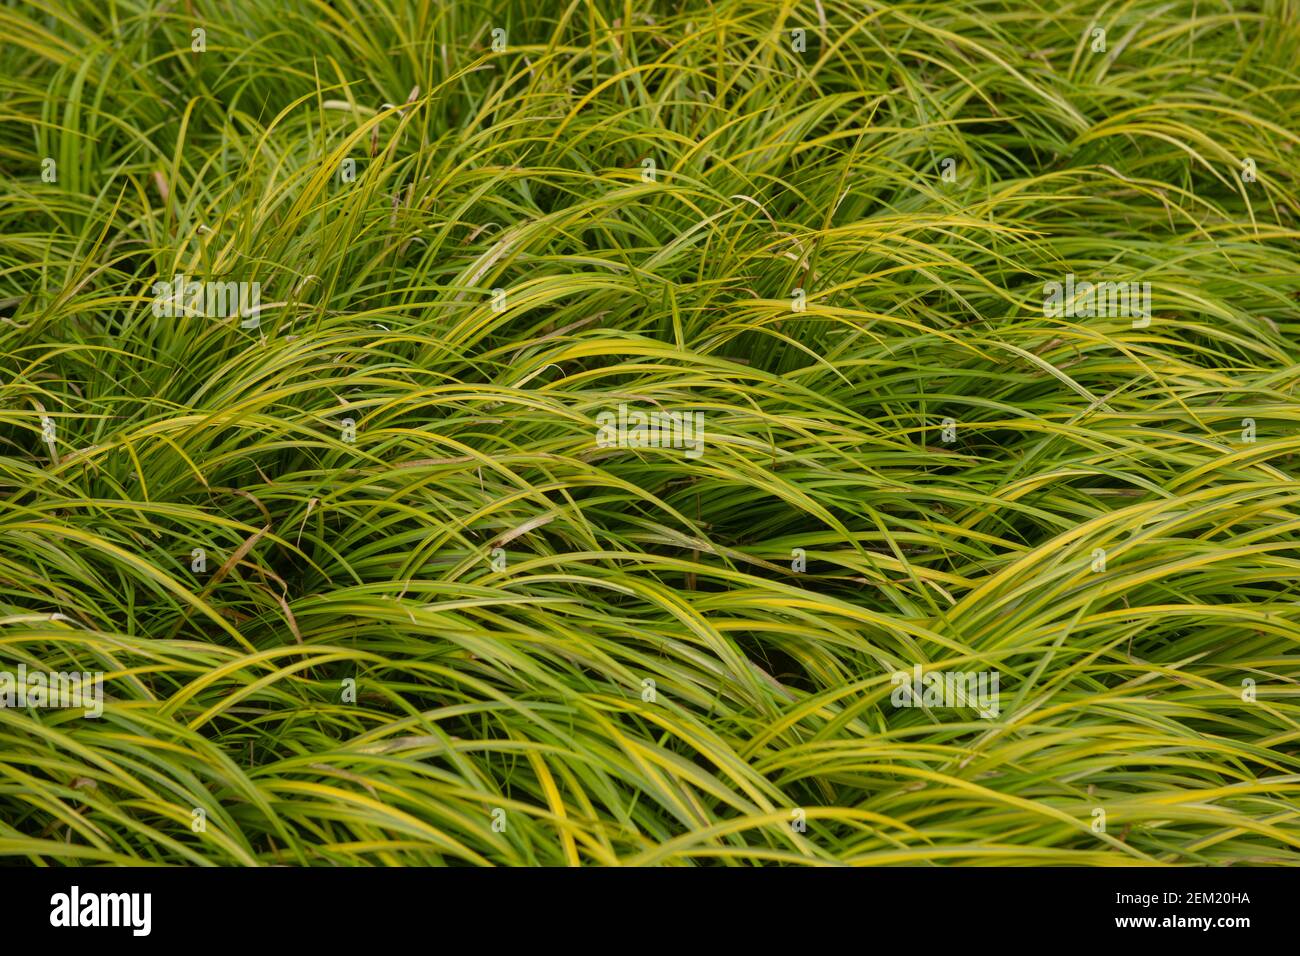 Winter Variegated Green and Yellow Foliage of the Grassy Leaved Sweet Flag Plant (Acorus gramineus 'Oborozuki') Growing in a Garden in Rural Devon, En Stock Photo